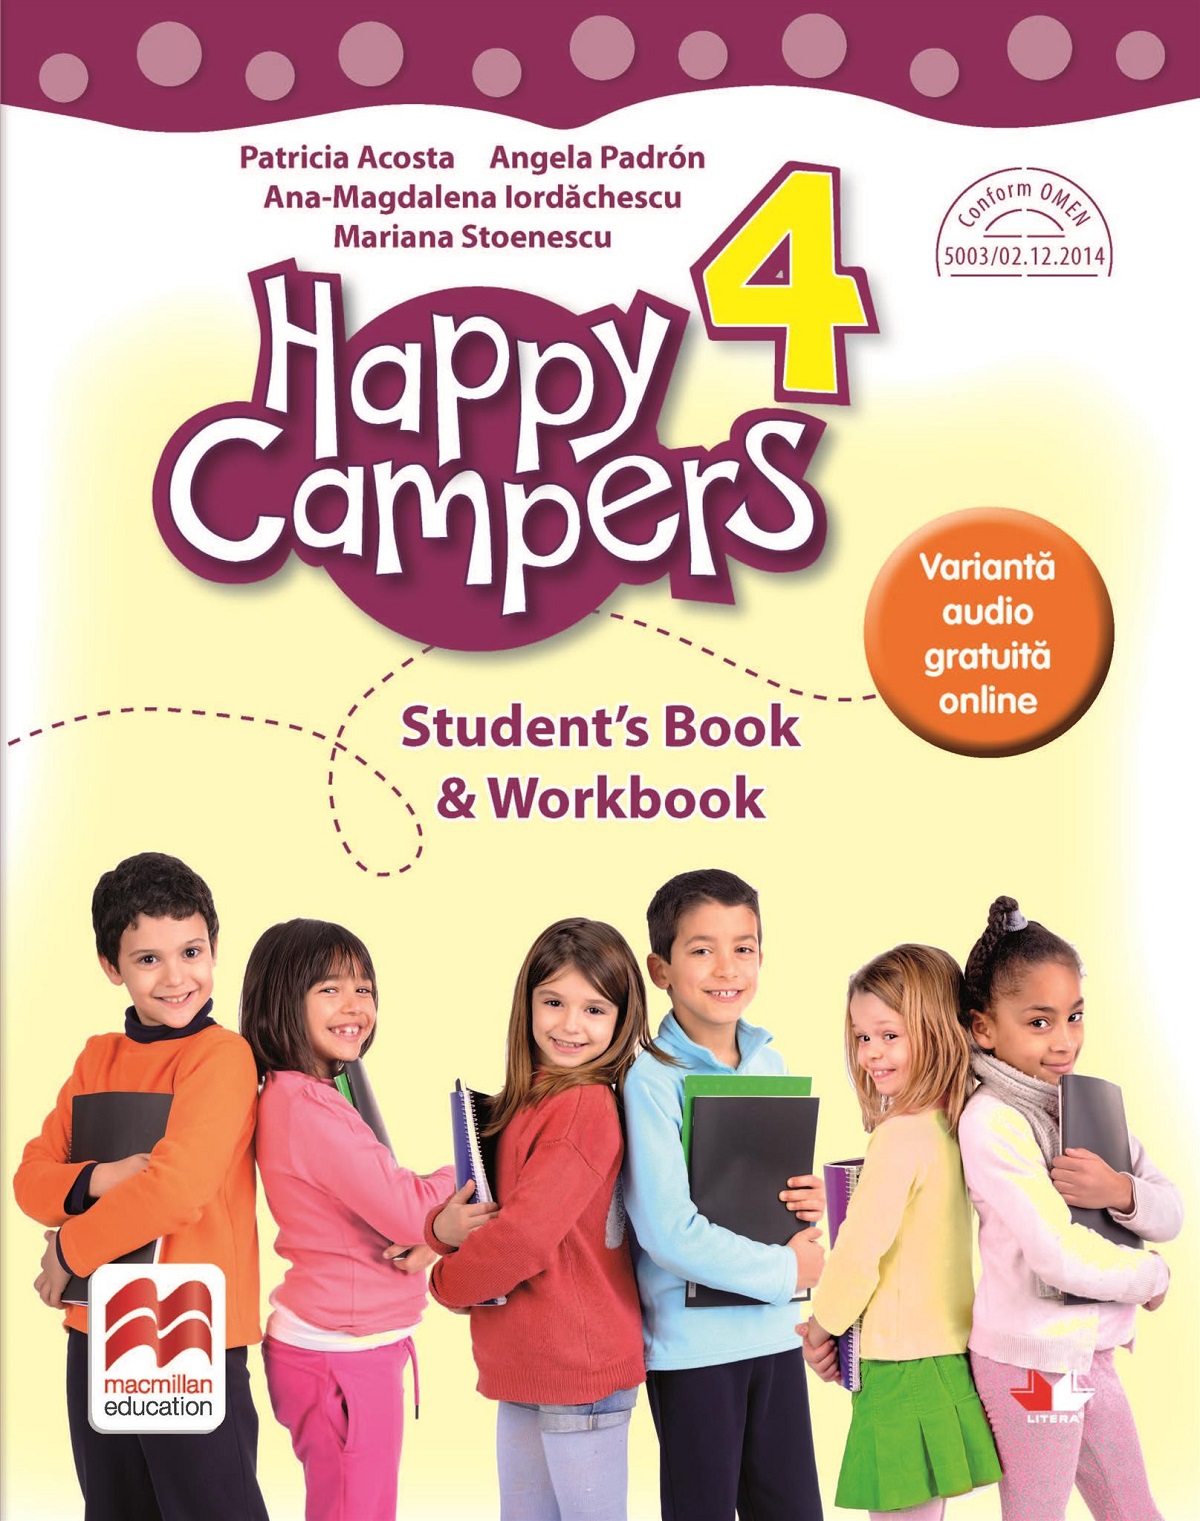 Happy Campers. Student's Book and Workbook - Clasa 4 - Patricia Acosta